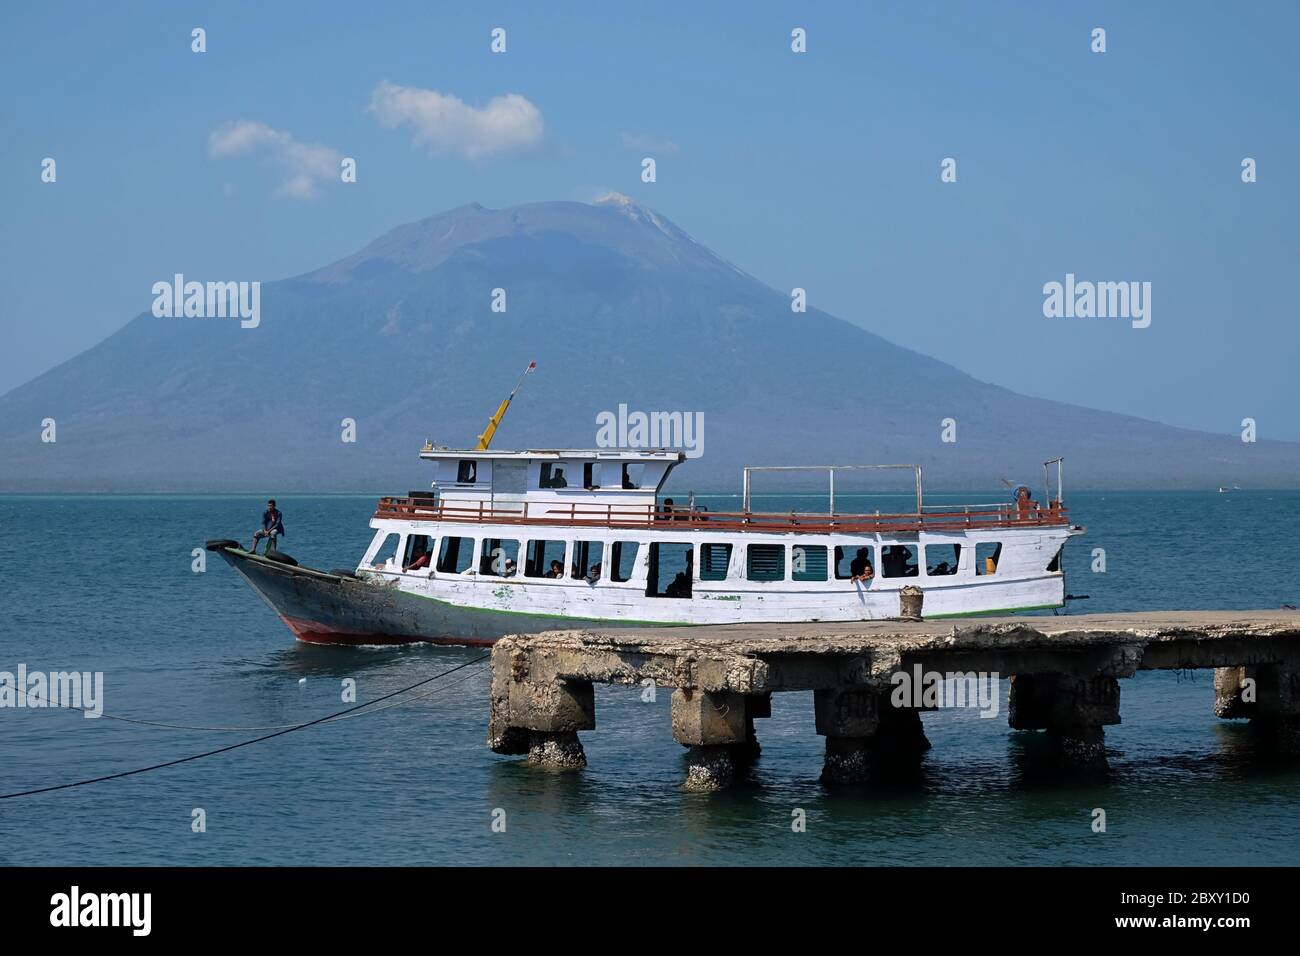 A wooden passenger ship moving on the coastal water of Lewoleba, with Lewotolok volcano can be seen in the background. Stock Photo